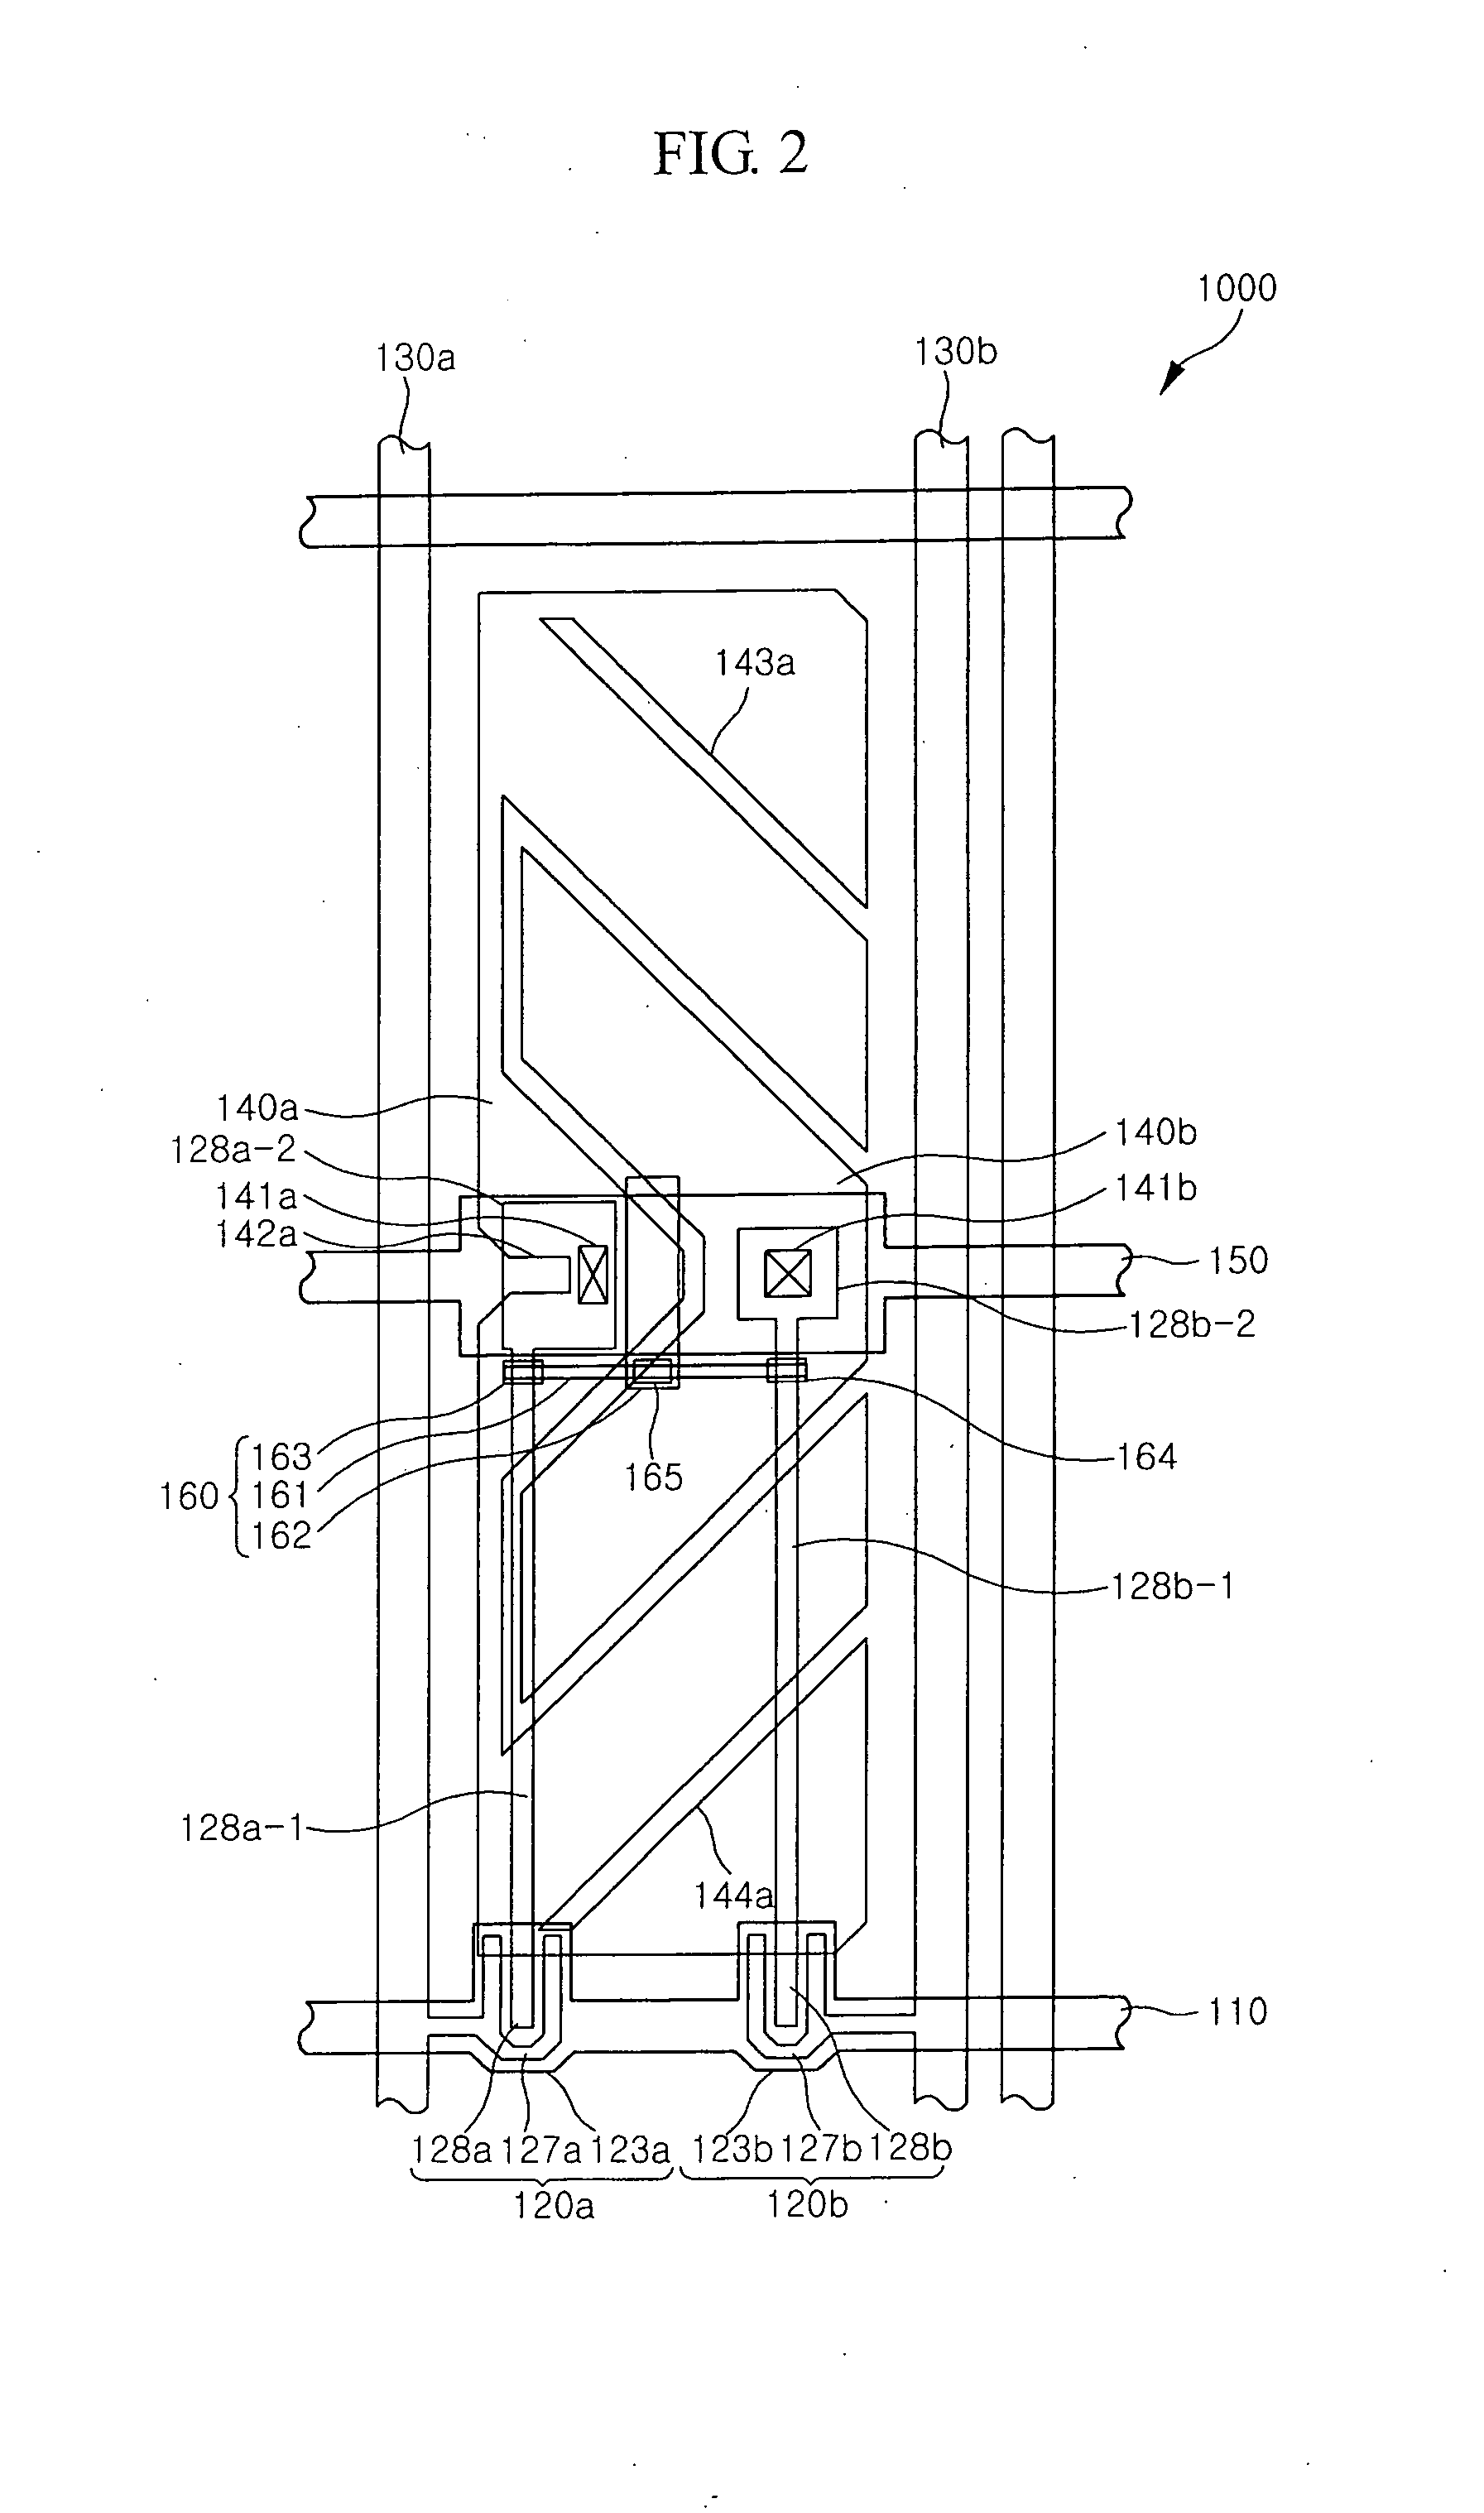 Liquid crystal display and methods of fabricating and repairing the same